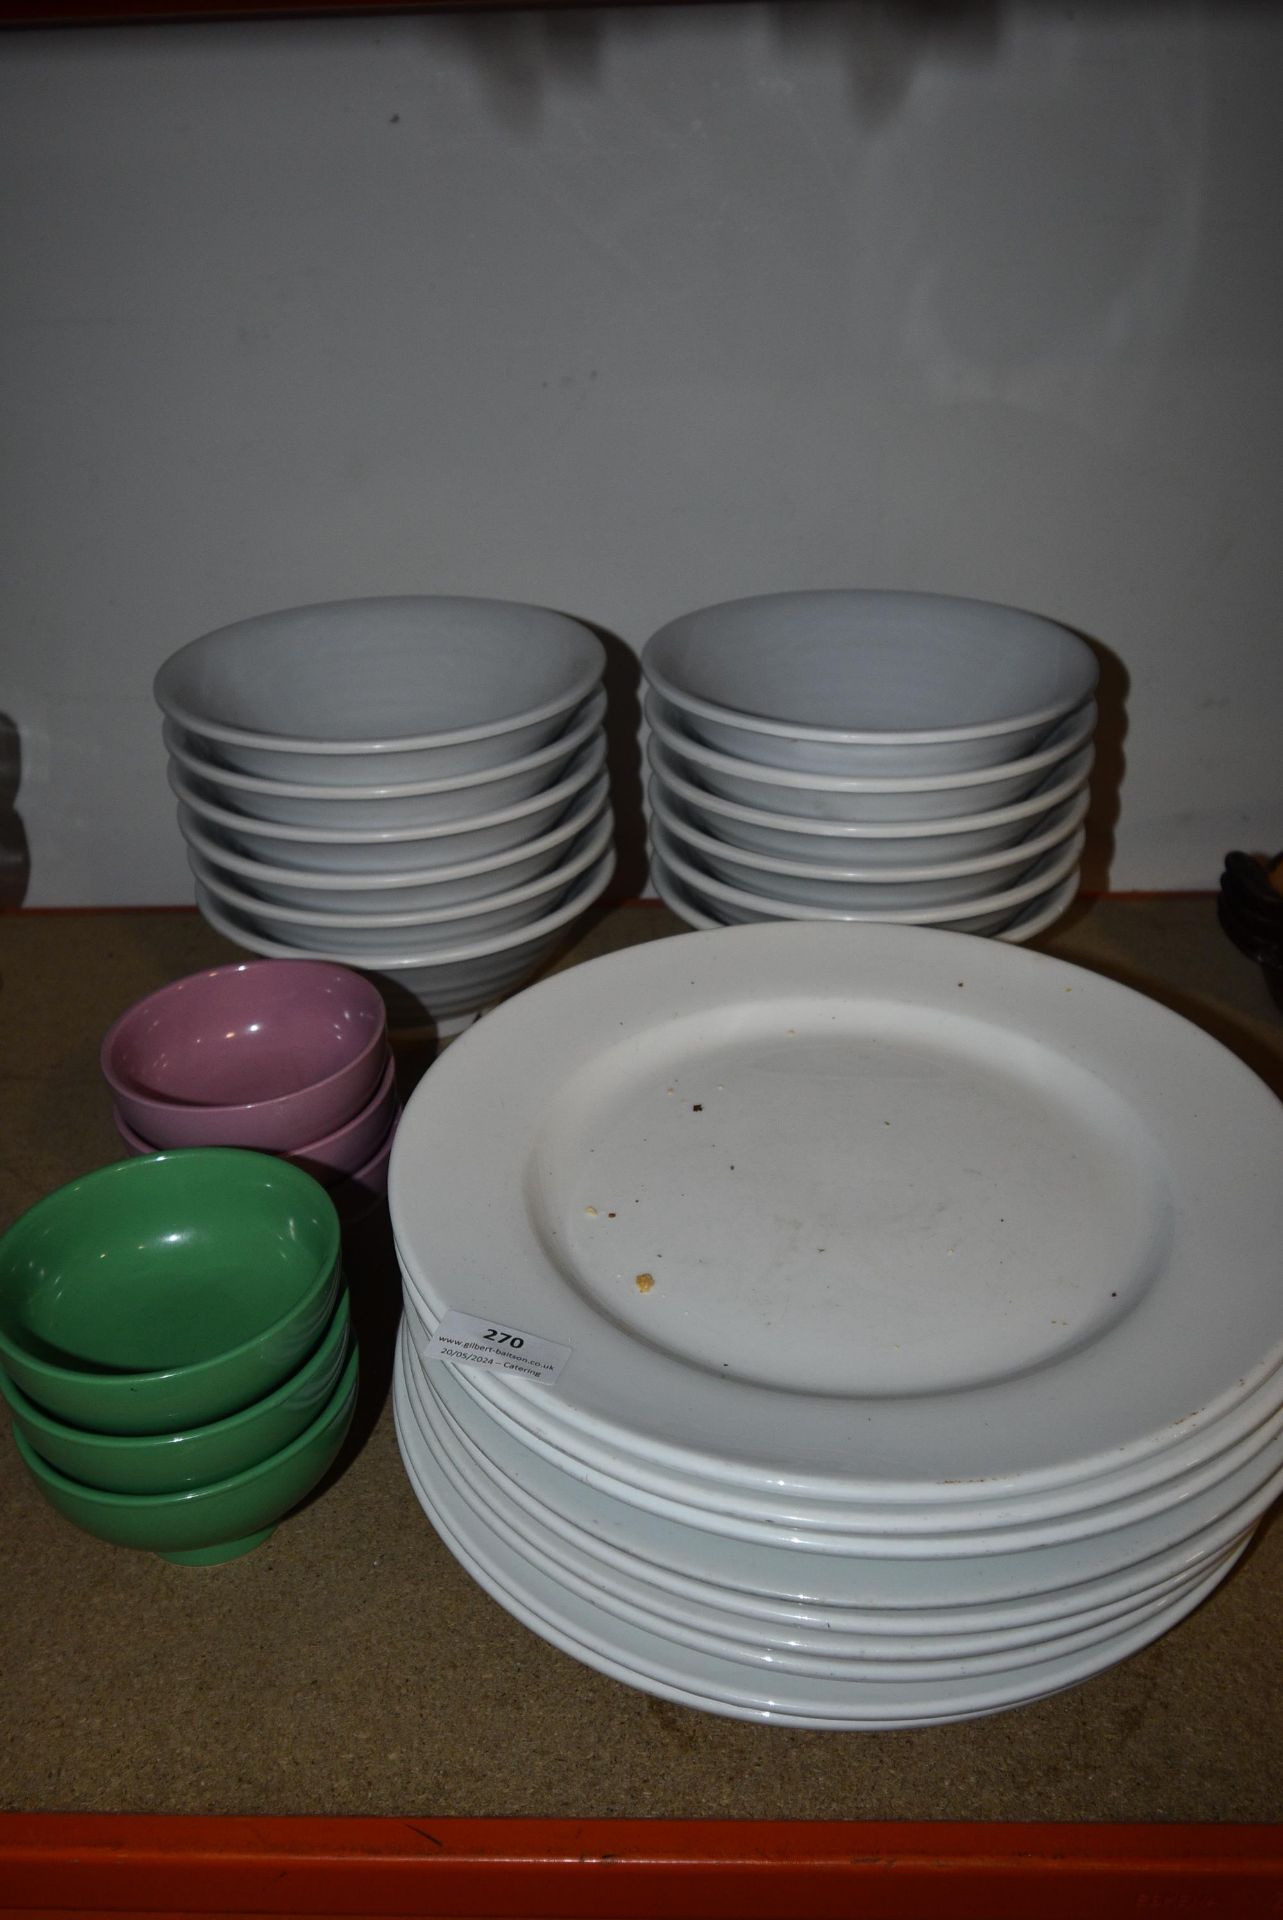 Quantity of Plain White Plates and Bowls, plus Three Pink and Three Green Bowls